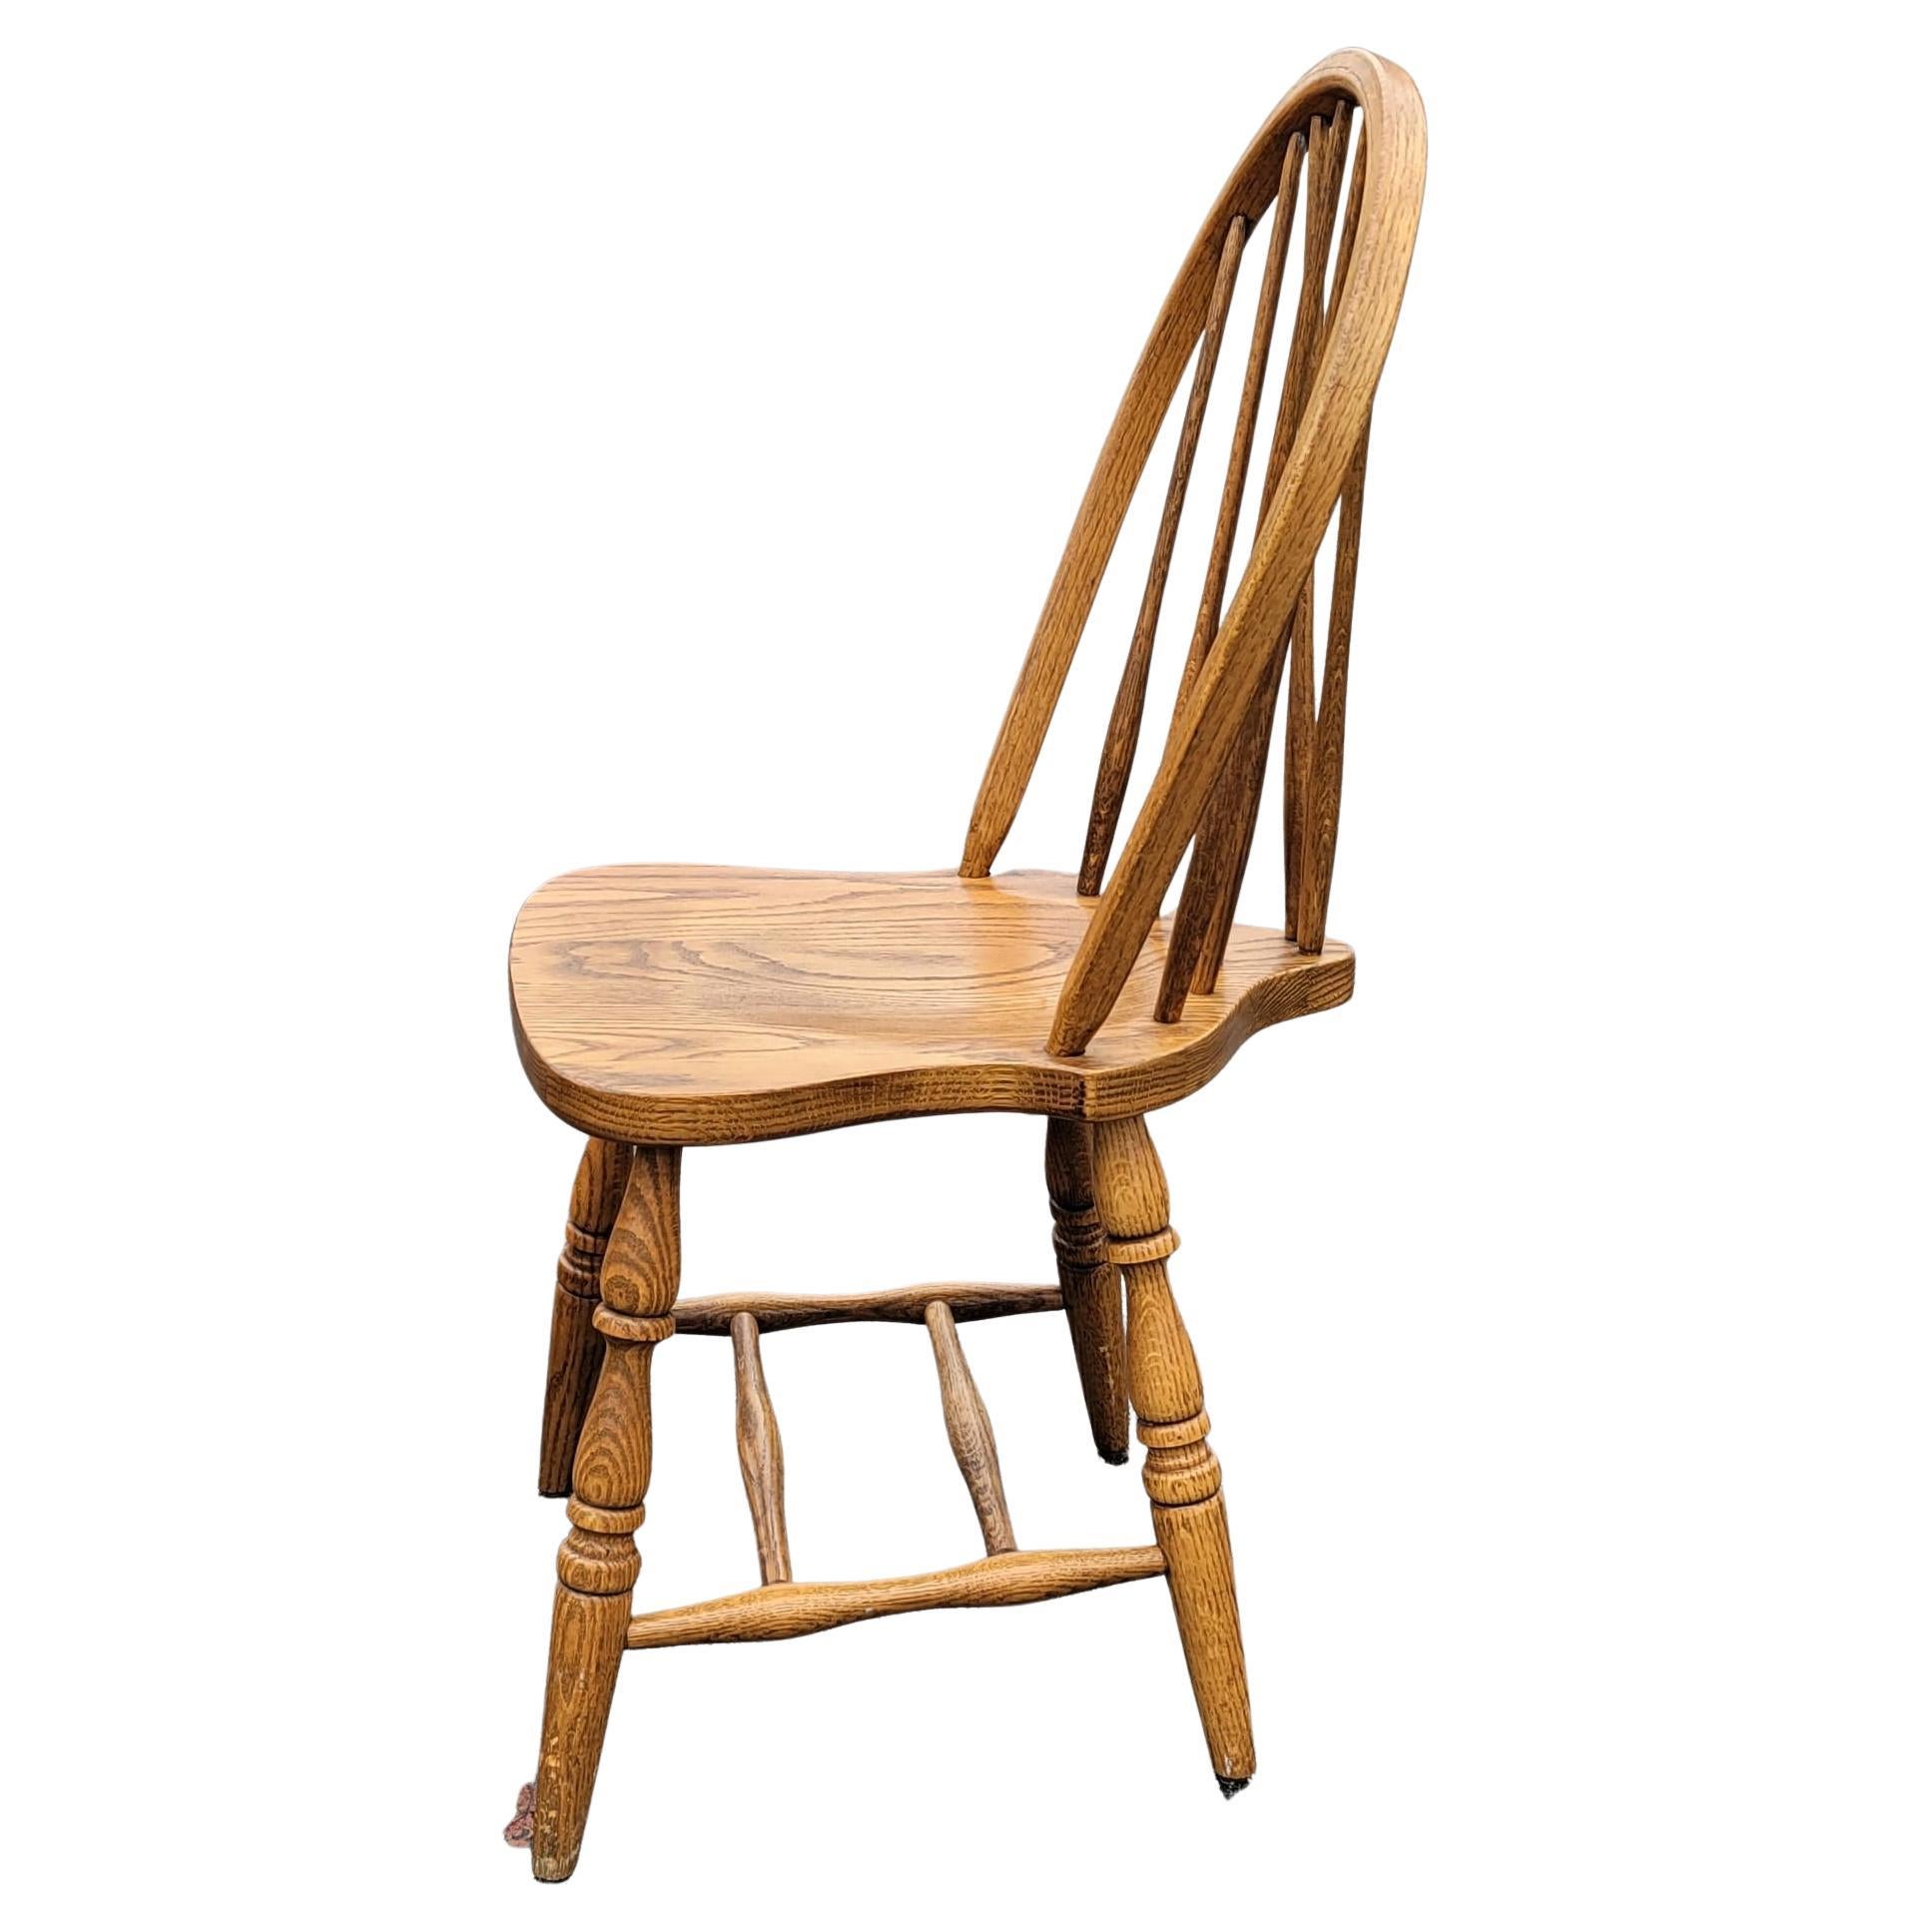 Hand-Carved American Arts & Crafts Oak Fiddleback Windsor Chairs, Pair For Sale